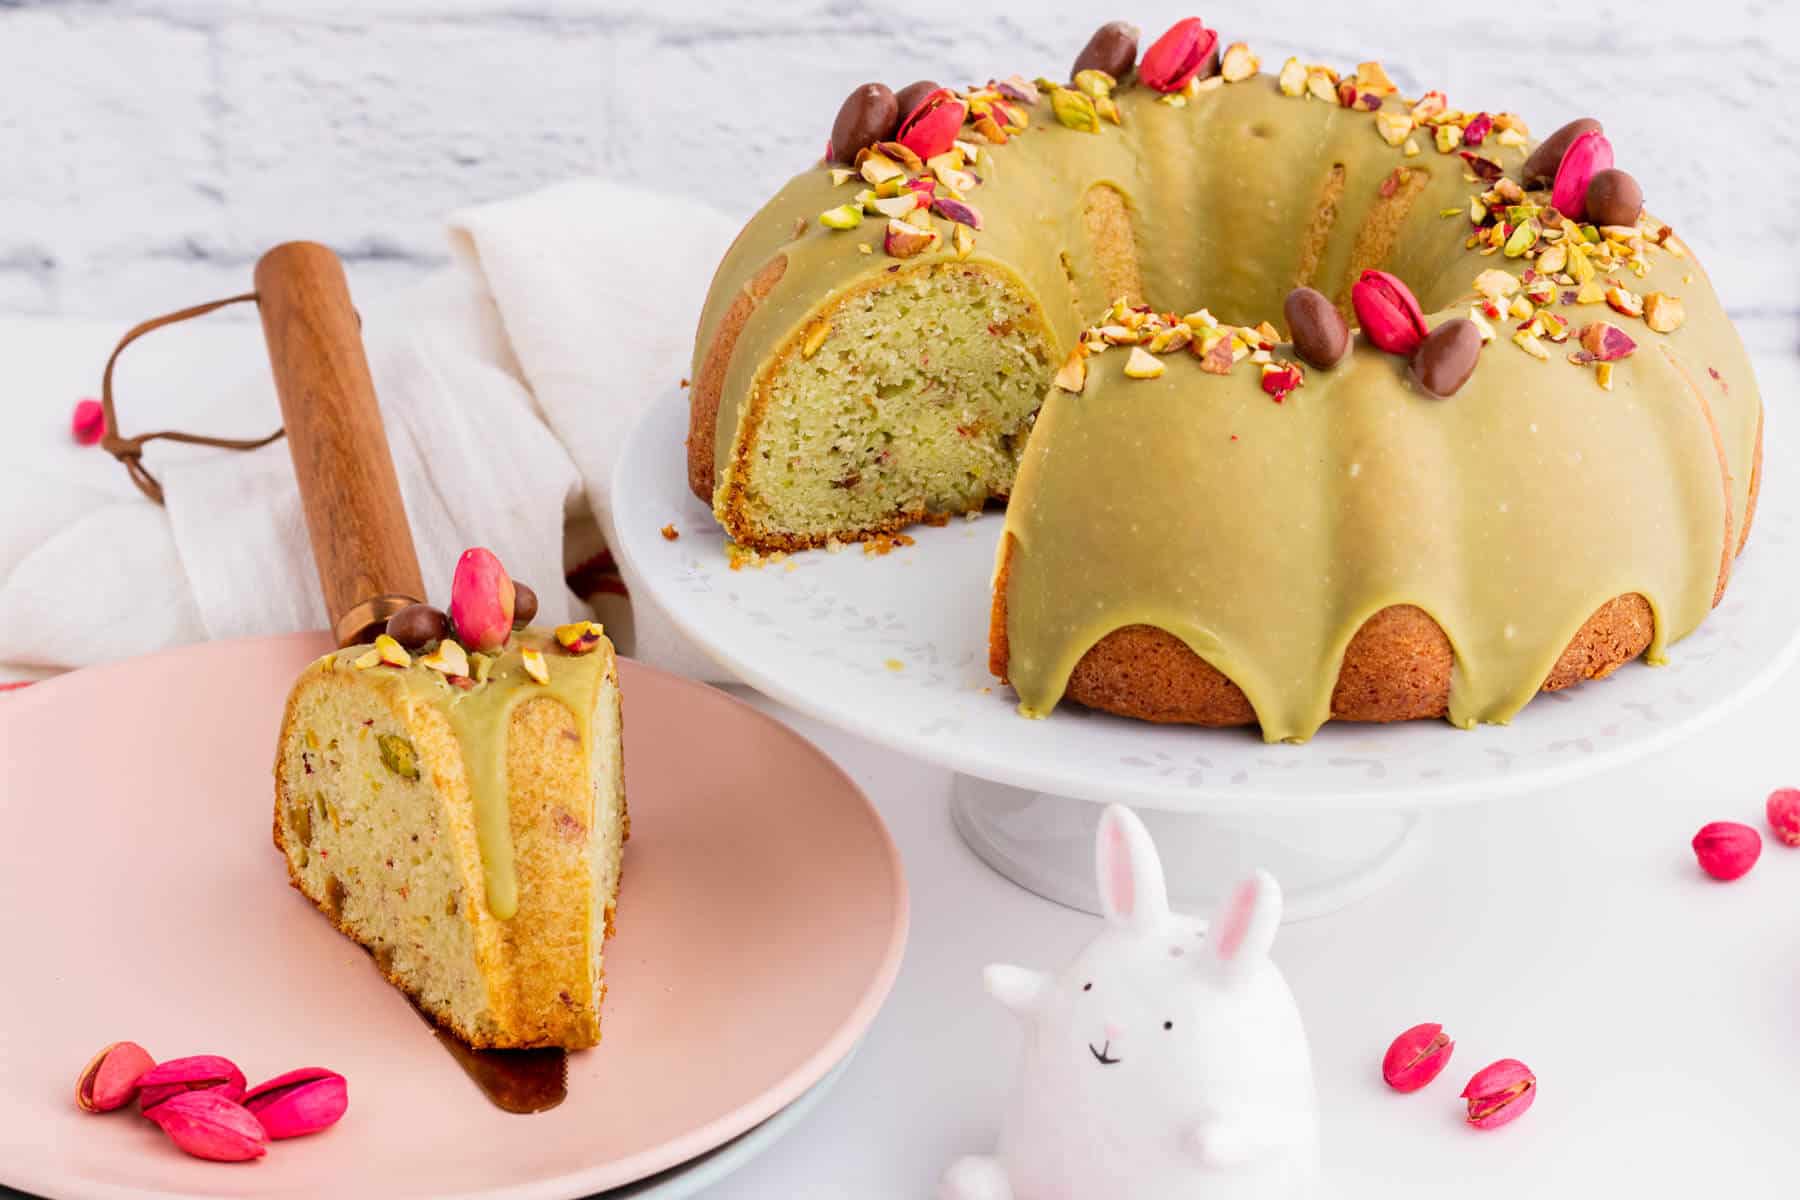 A slice of cake on a plate beside a whole pistachio decorated bundt cake. 